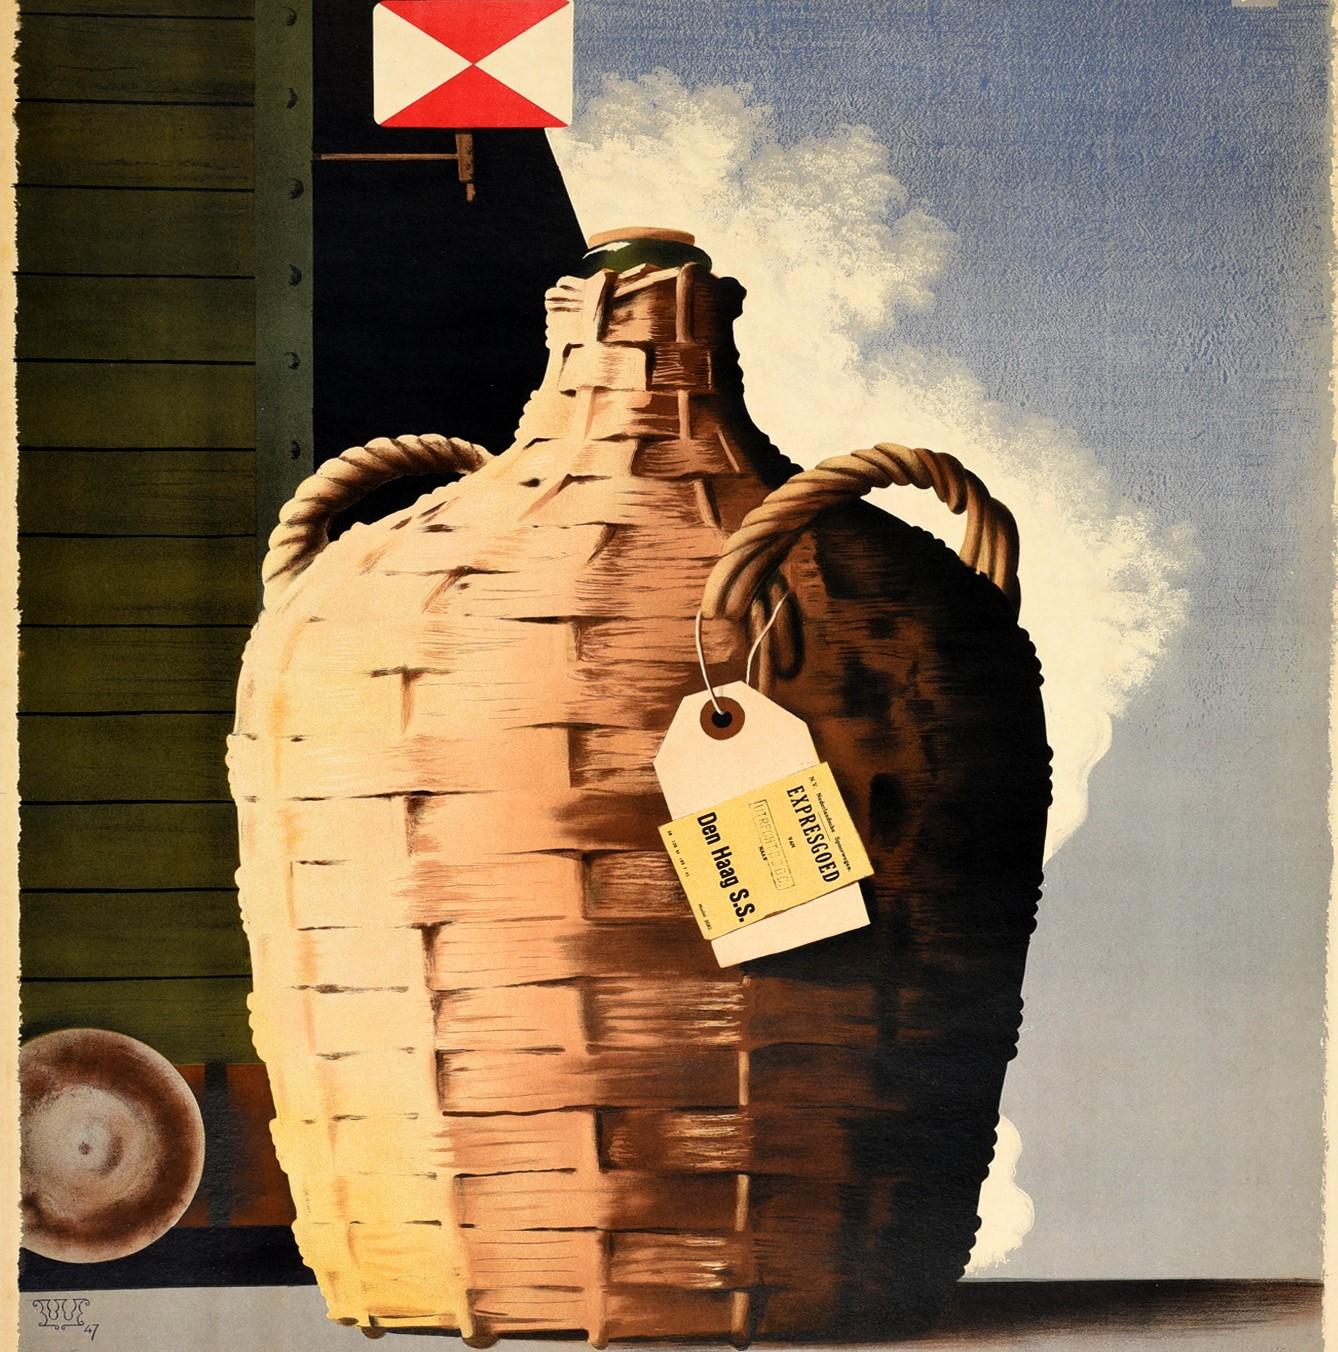 Original Vintage Poster Verzend Per Spoor Express Goods By Rail Wine Den Haag In Good Condition For Sale In London, GB